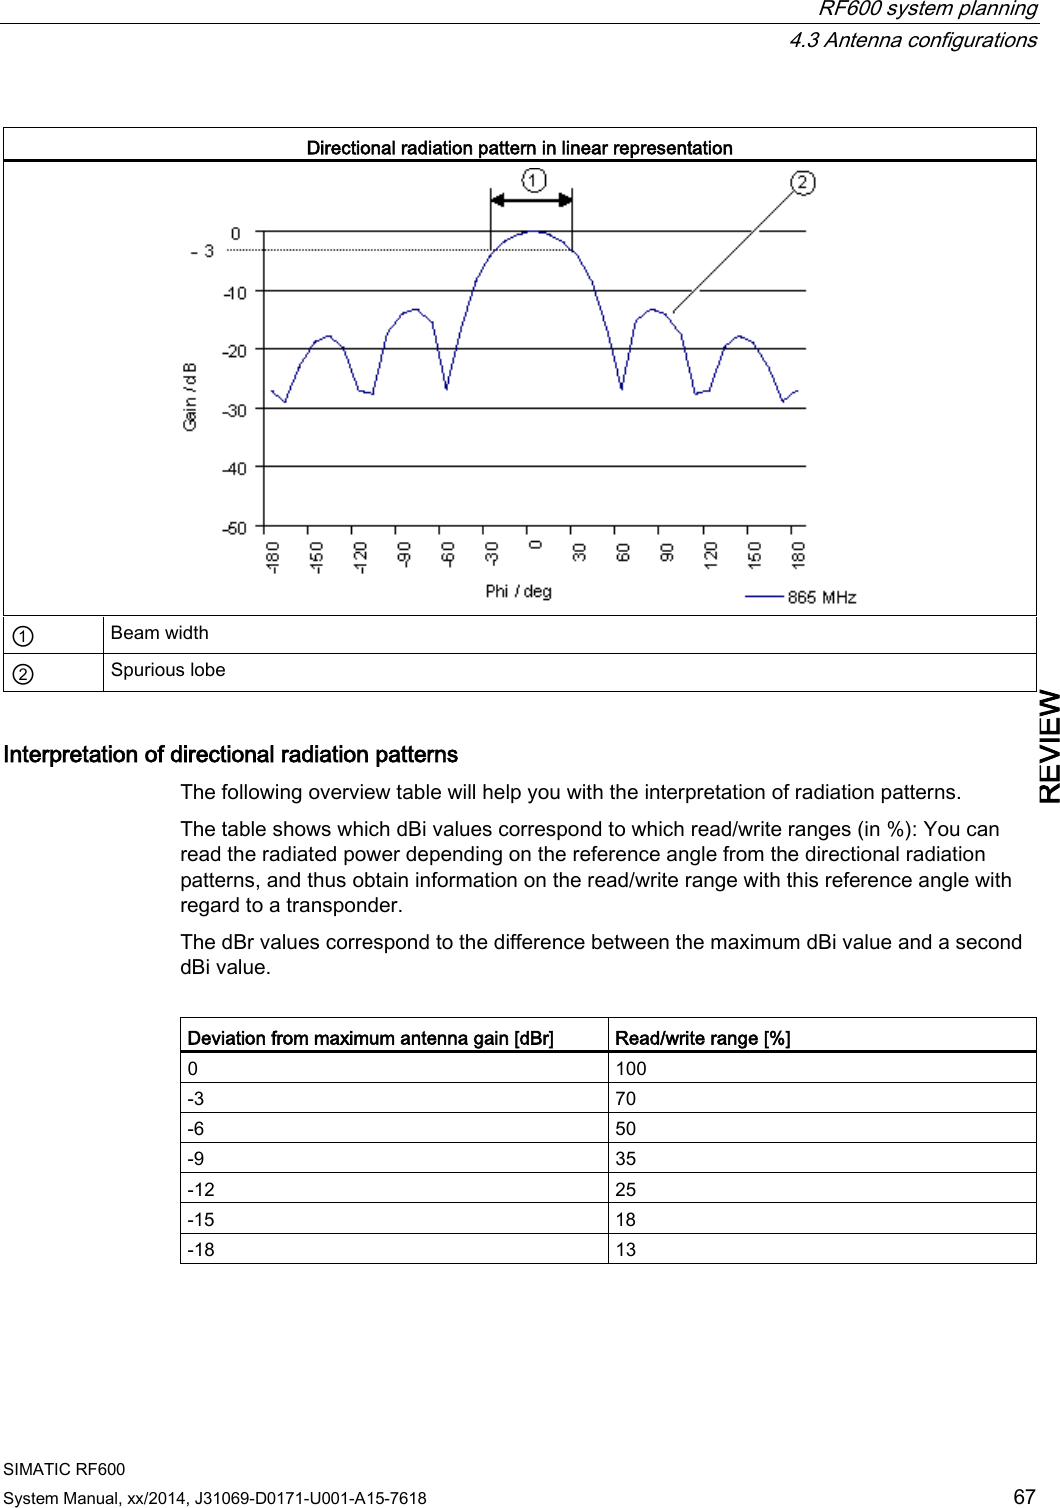  RF600 system planning  4.3 Antenna configurations SIMATIC RF600 System Manual, xx/2014, J31069-D0171-U001-A15-7618 67 REVIEW  Directional radiation pattern in linear representation  ① Beam width ② Spurious lobe Interpretation of directional radiation patterns The following overview table will help you with the interpretation of radiation patterns.  The table shows which dBi values correspond to which read/write ranges (in %): You can read the radiated power depending on the reference angle from the directional radiation patterns, and thus obtain information on the read/write range with this reference angle with regard to a transponder. The dBr values correspond to the difference between the maximum dBi value and a second dBi value.  Deviation from maximum antenna gain [dBr] Read/write range [%] 0 100 -3 70 -6 50 -9 35 -12 25 -15 18 -18 13 